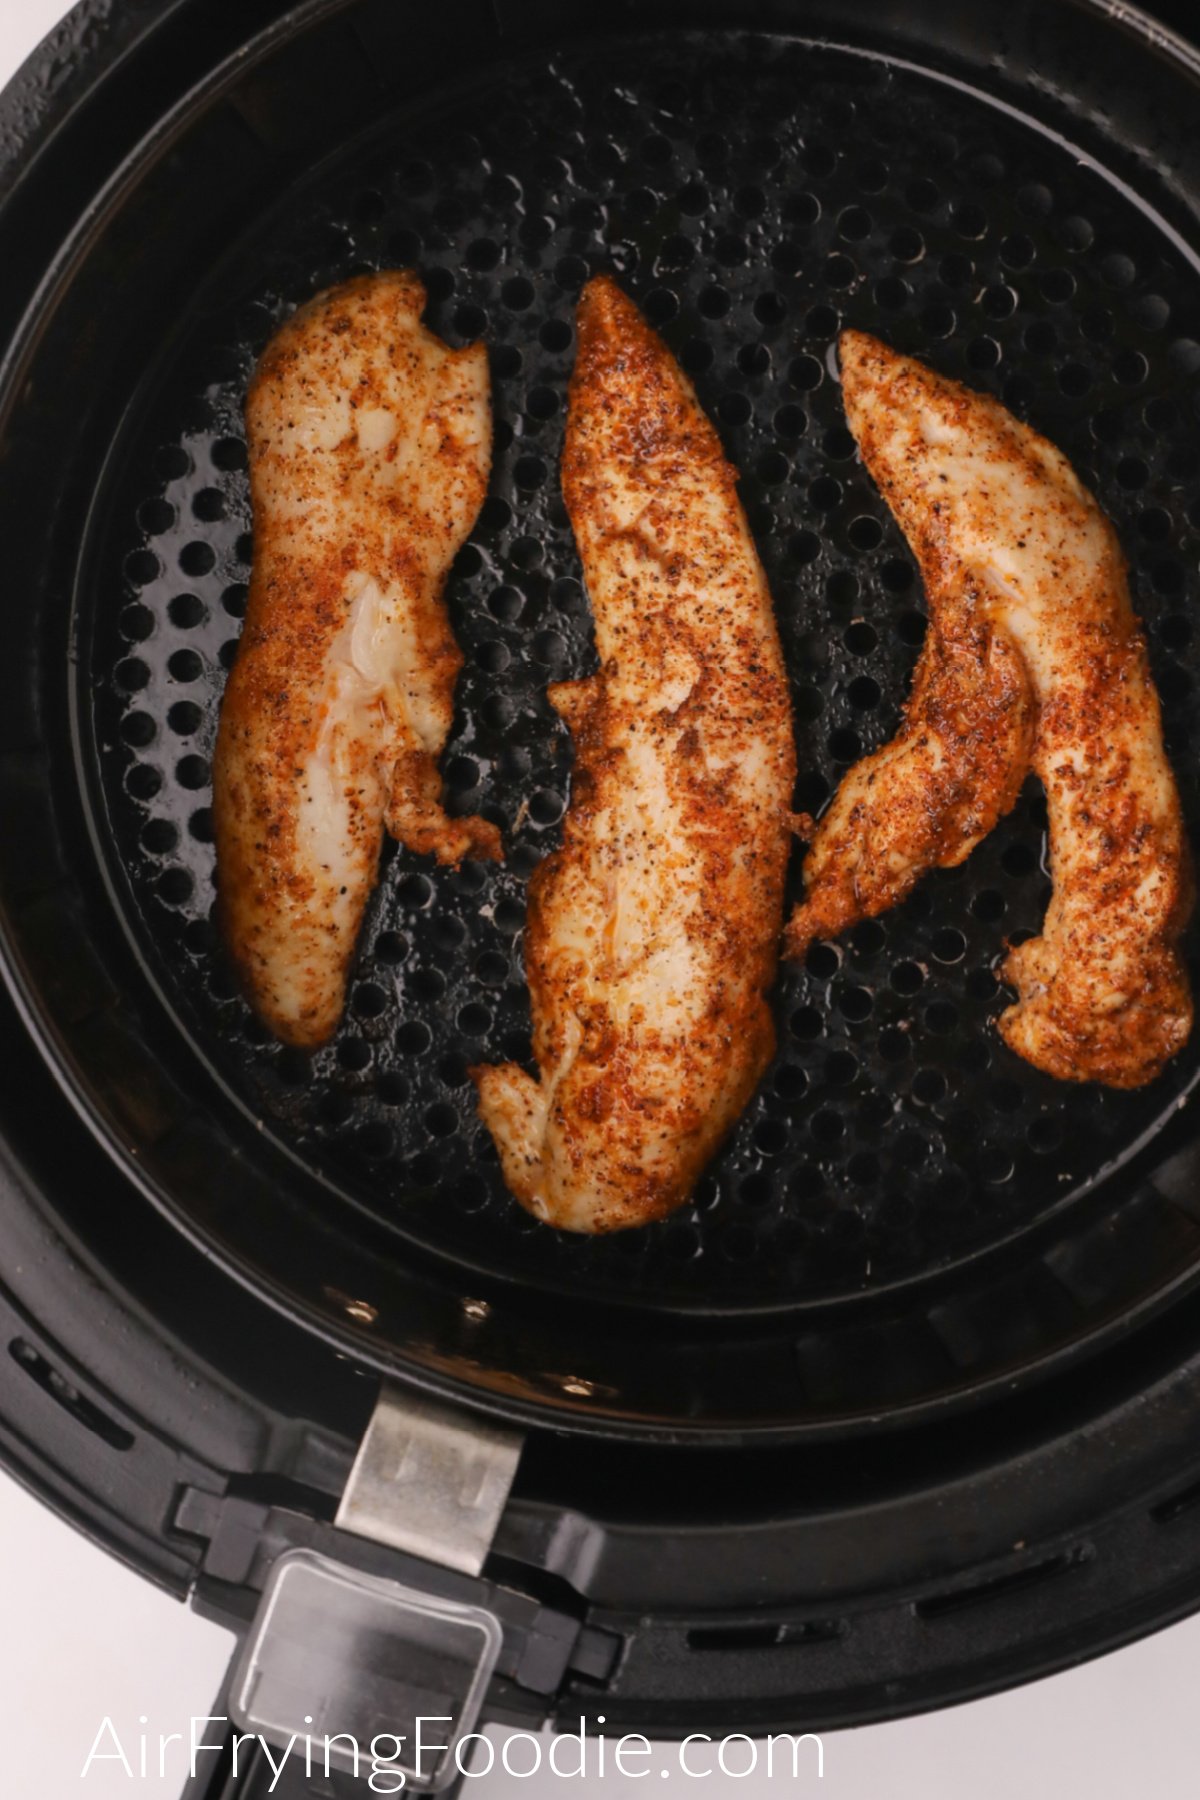 Cooked and seasoned naked chicken tenders in the air fryer basket, ready to serve.